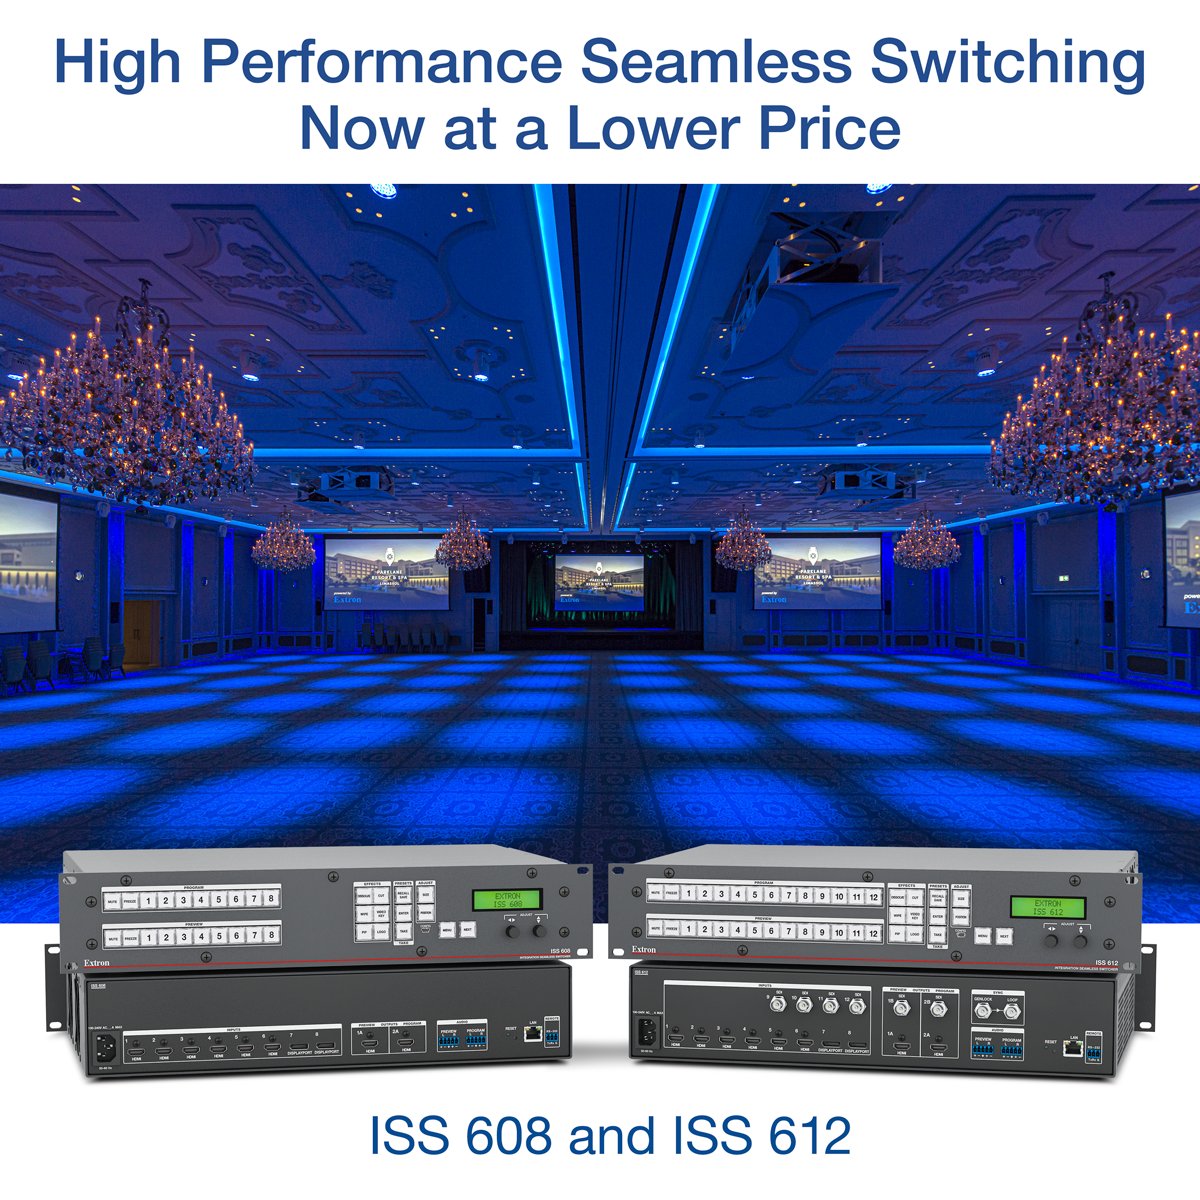 Good news for you and your clients, we've reduced the prices of our ISS 608 and ISS 612 4K/60 digital seamless switchers!

They combine true seamless switching with advanced Vector™ 4K scaling technology for the dynamic switching and presentation of HDMI, DisplayPort, and